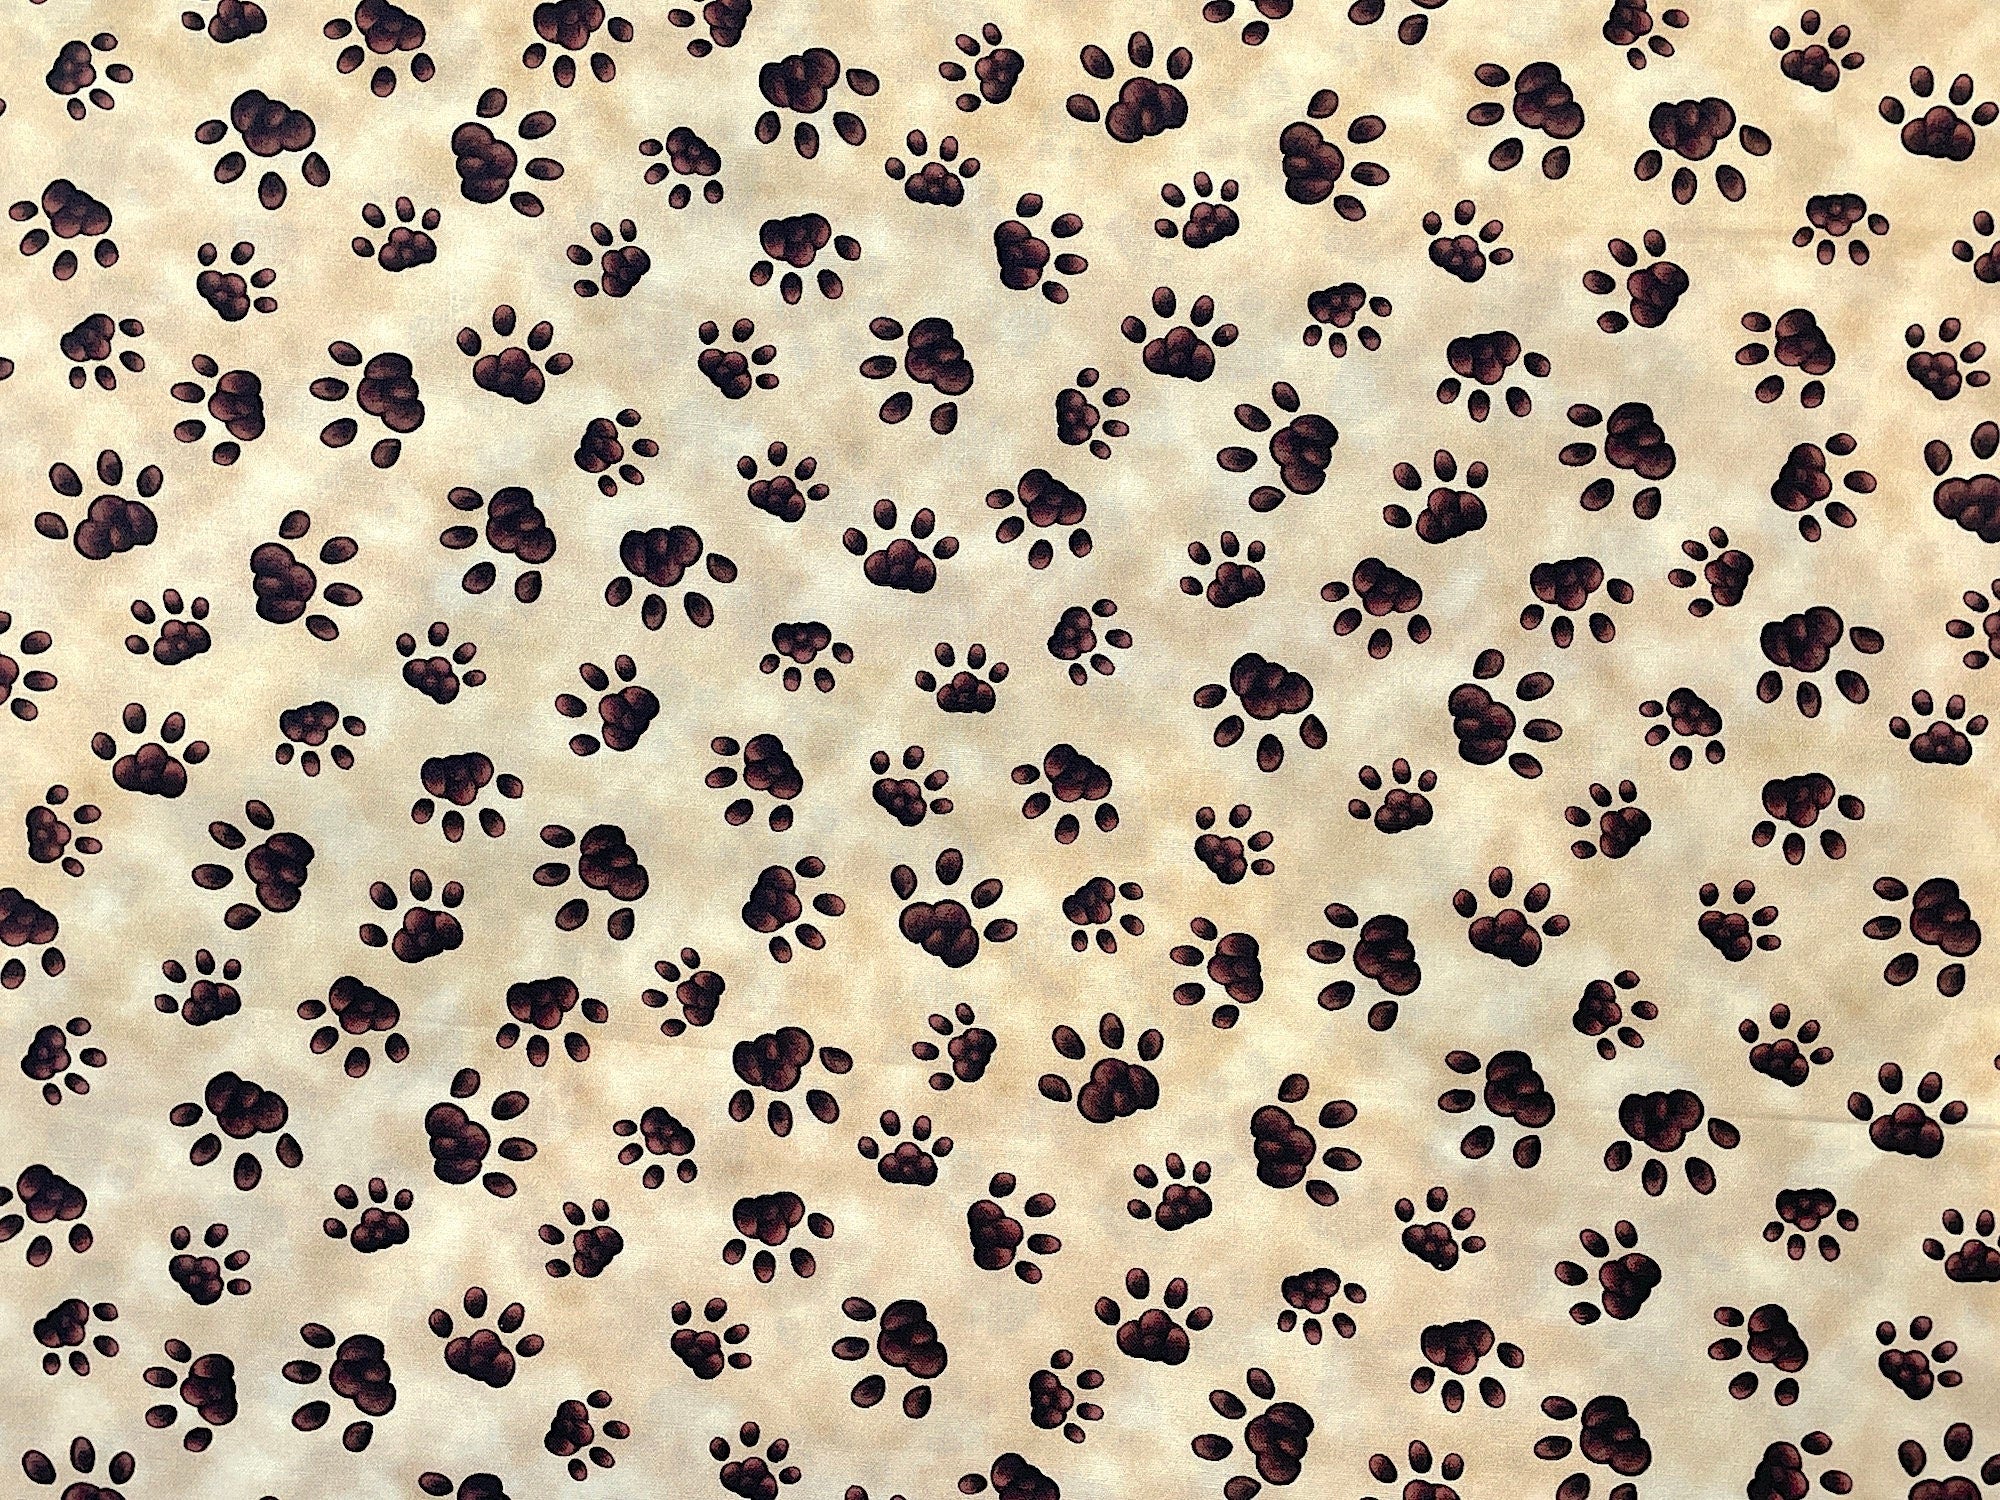 This cream colored cotton fabric is covered with shades of brown paw prints.